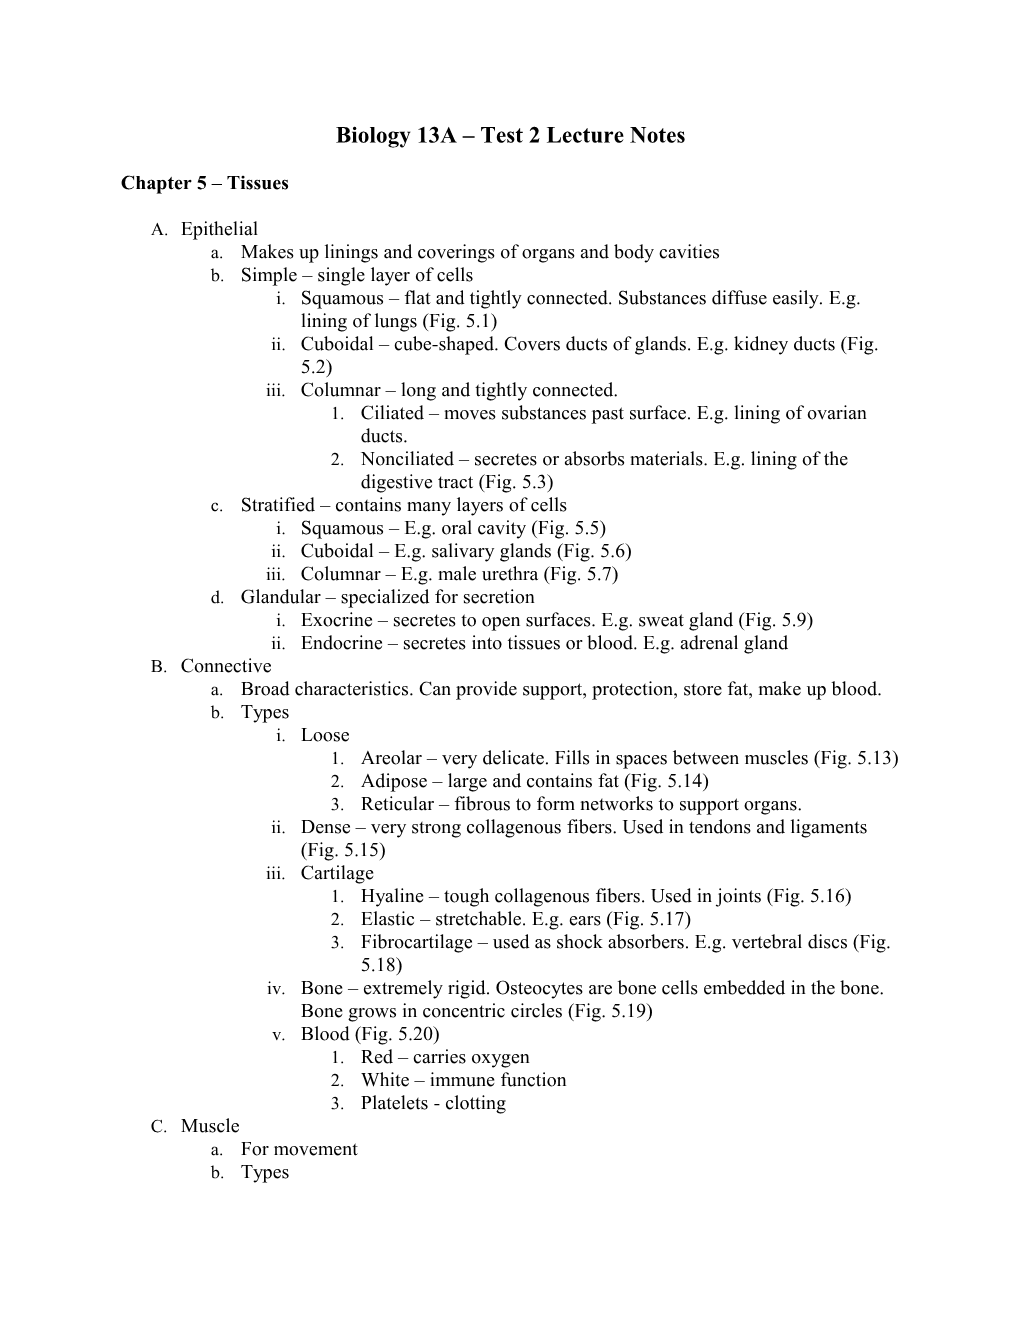 Biology 6 Test 3 Study Guide s1